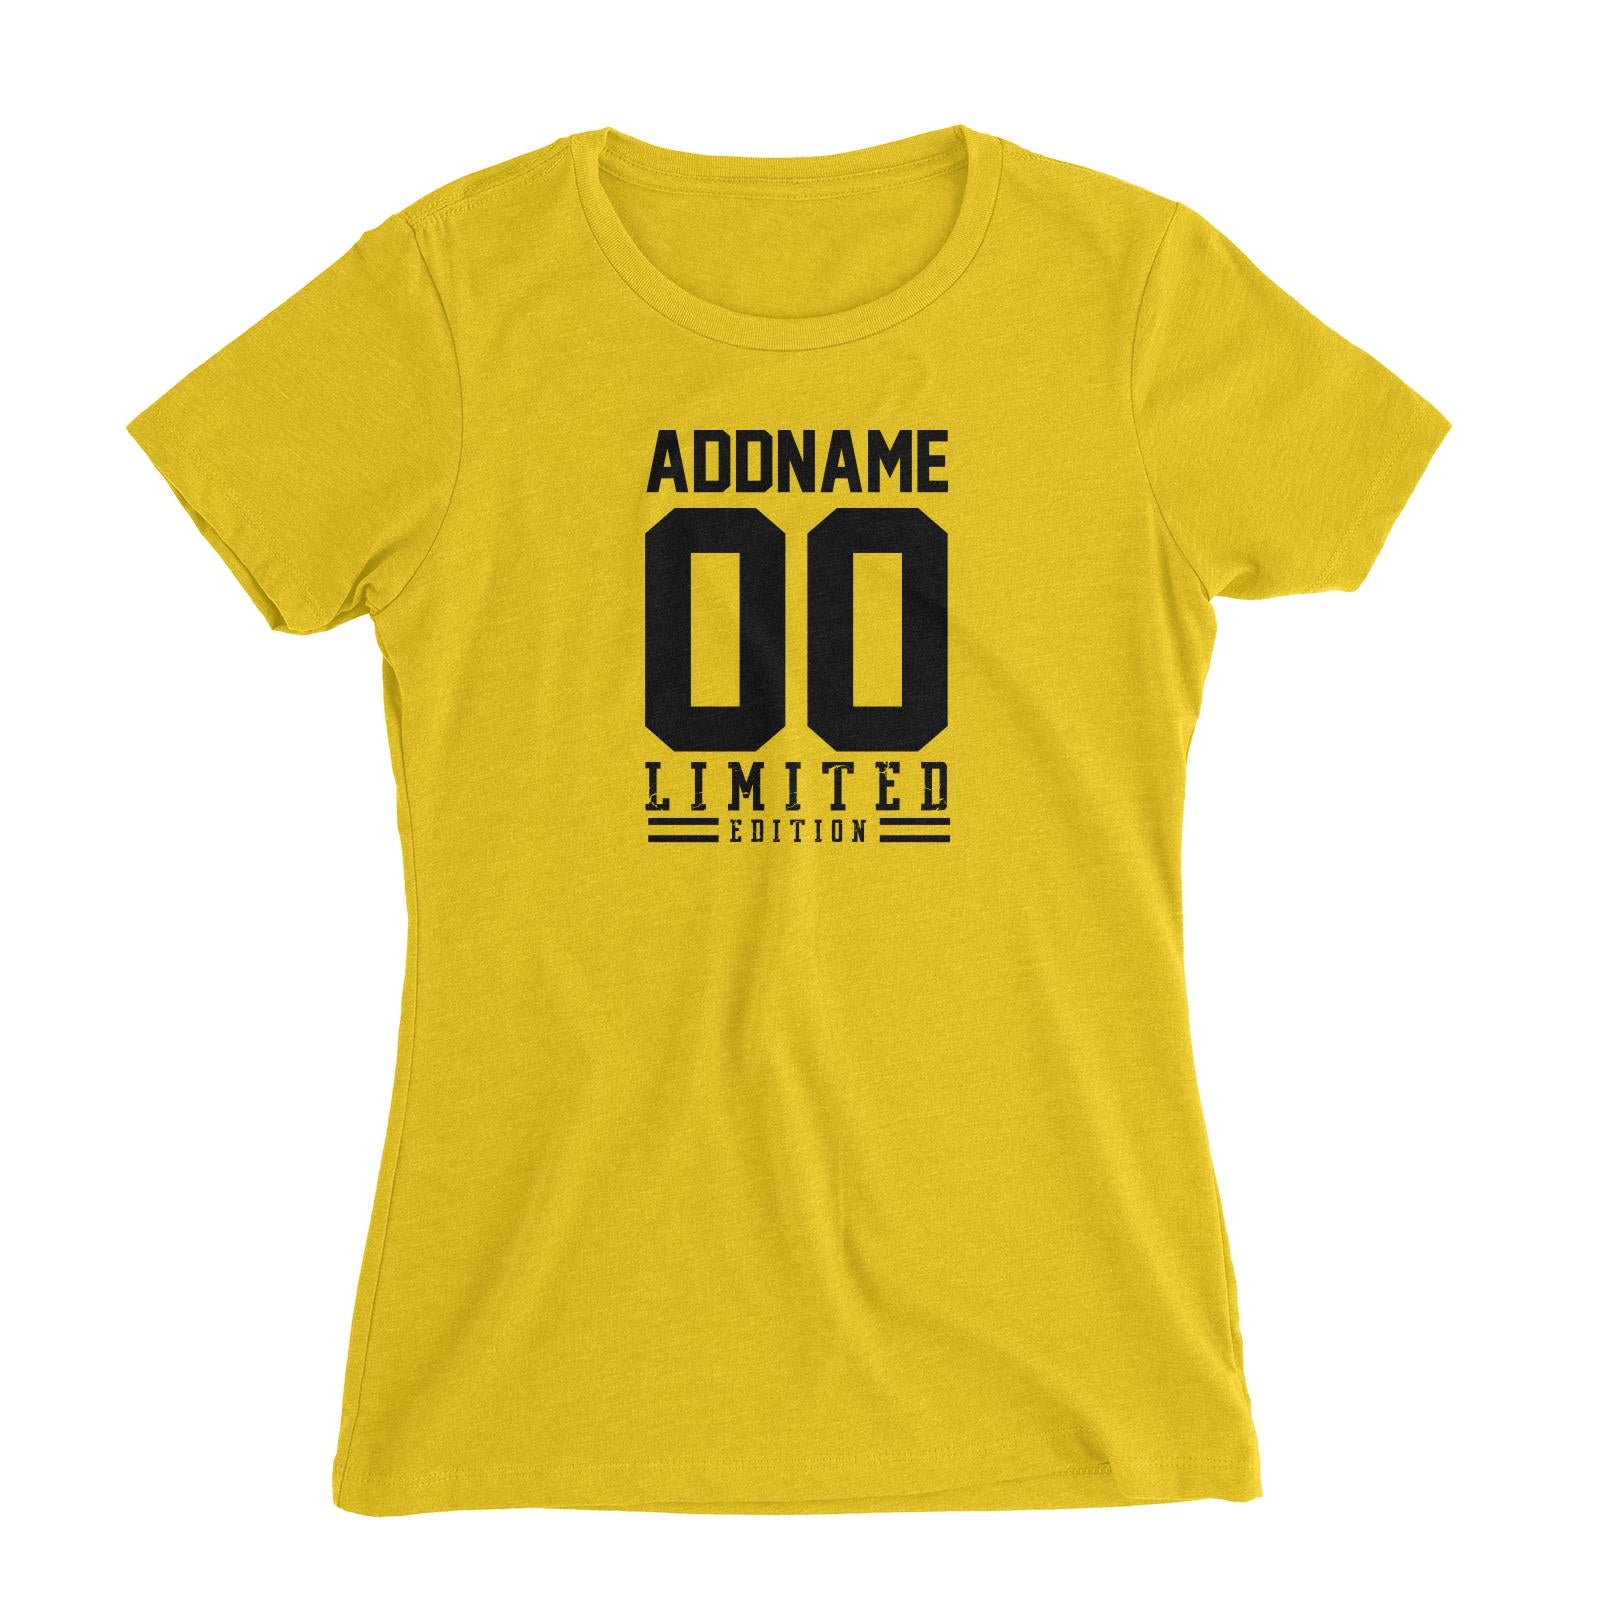 Limited Edition Jersey Personalizable with Name and Number Women's Slim Fit T-Shirt